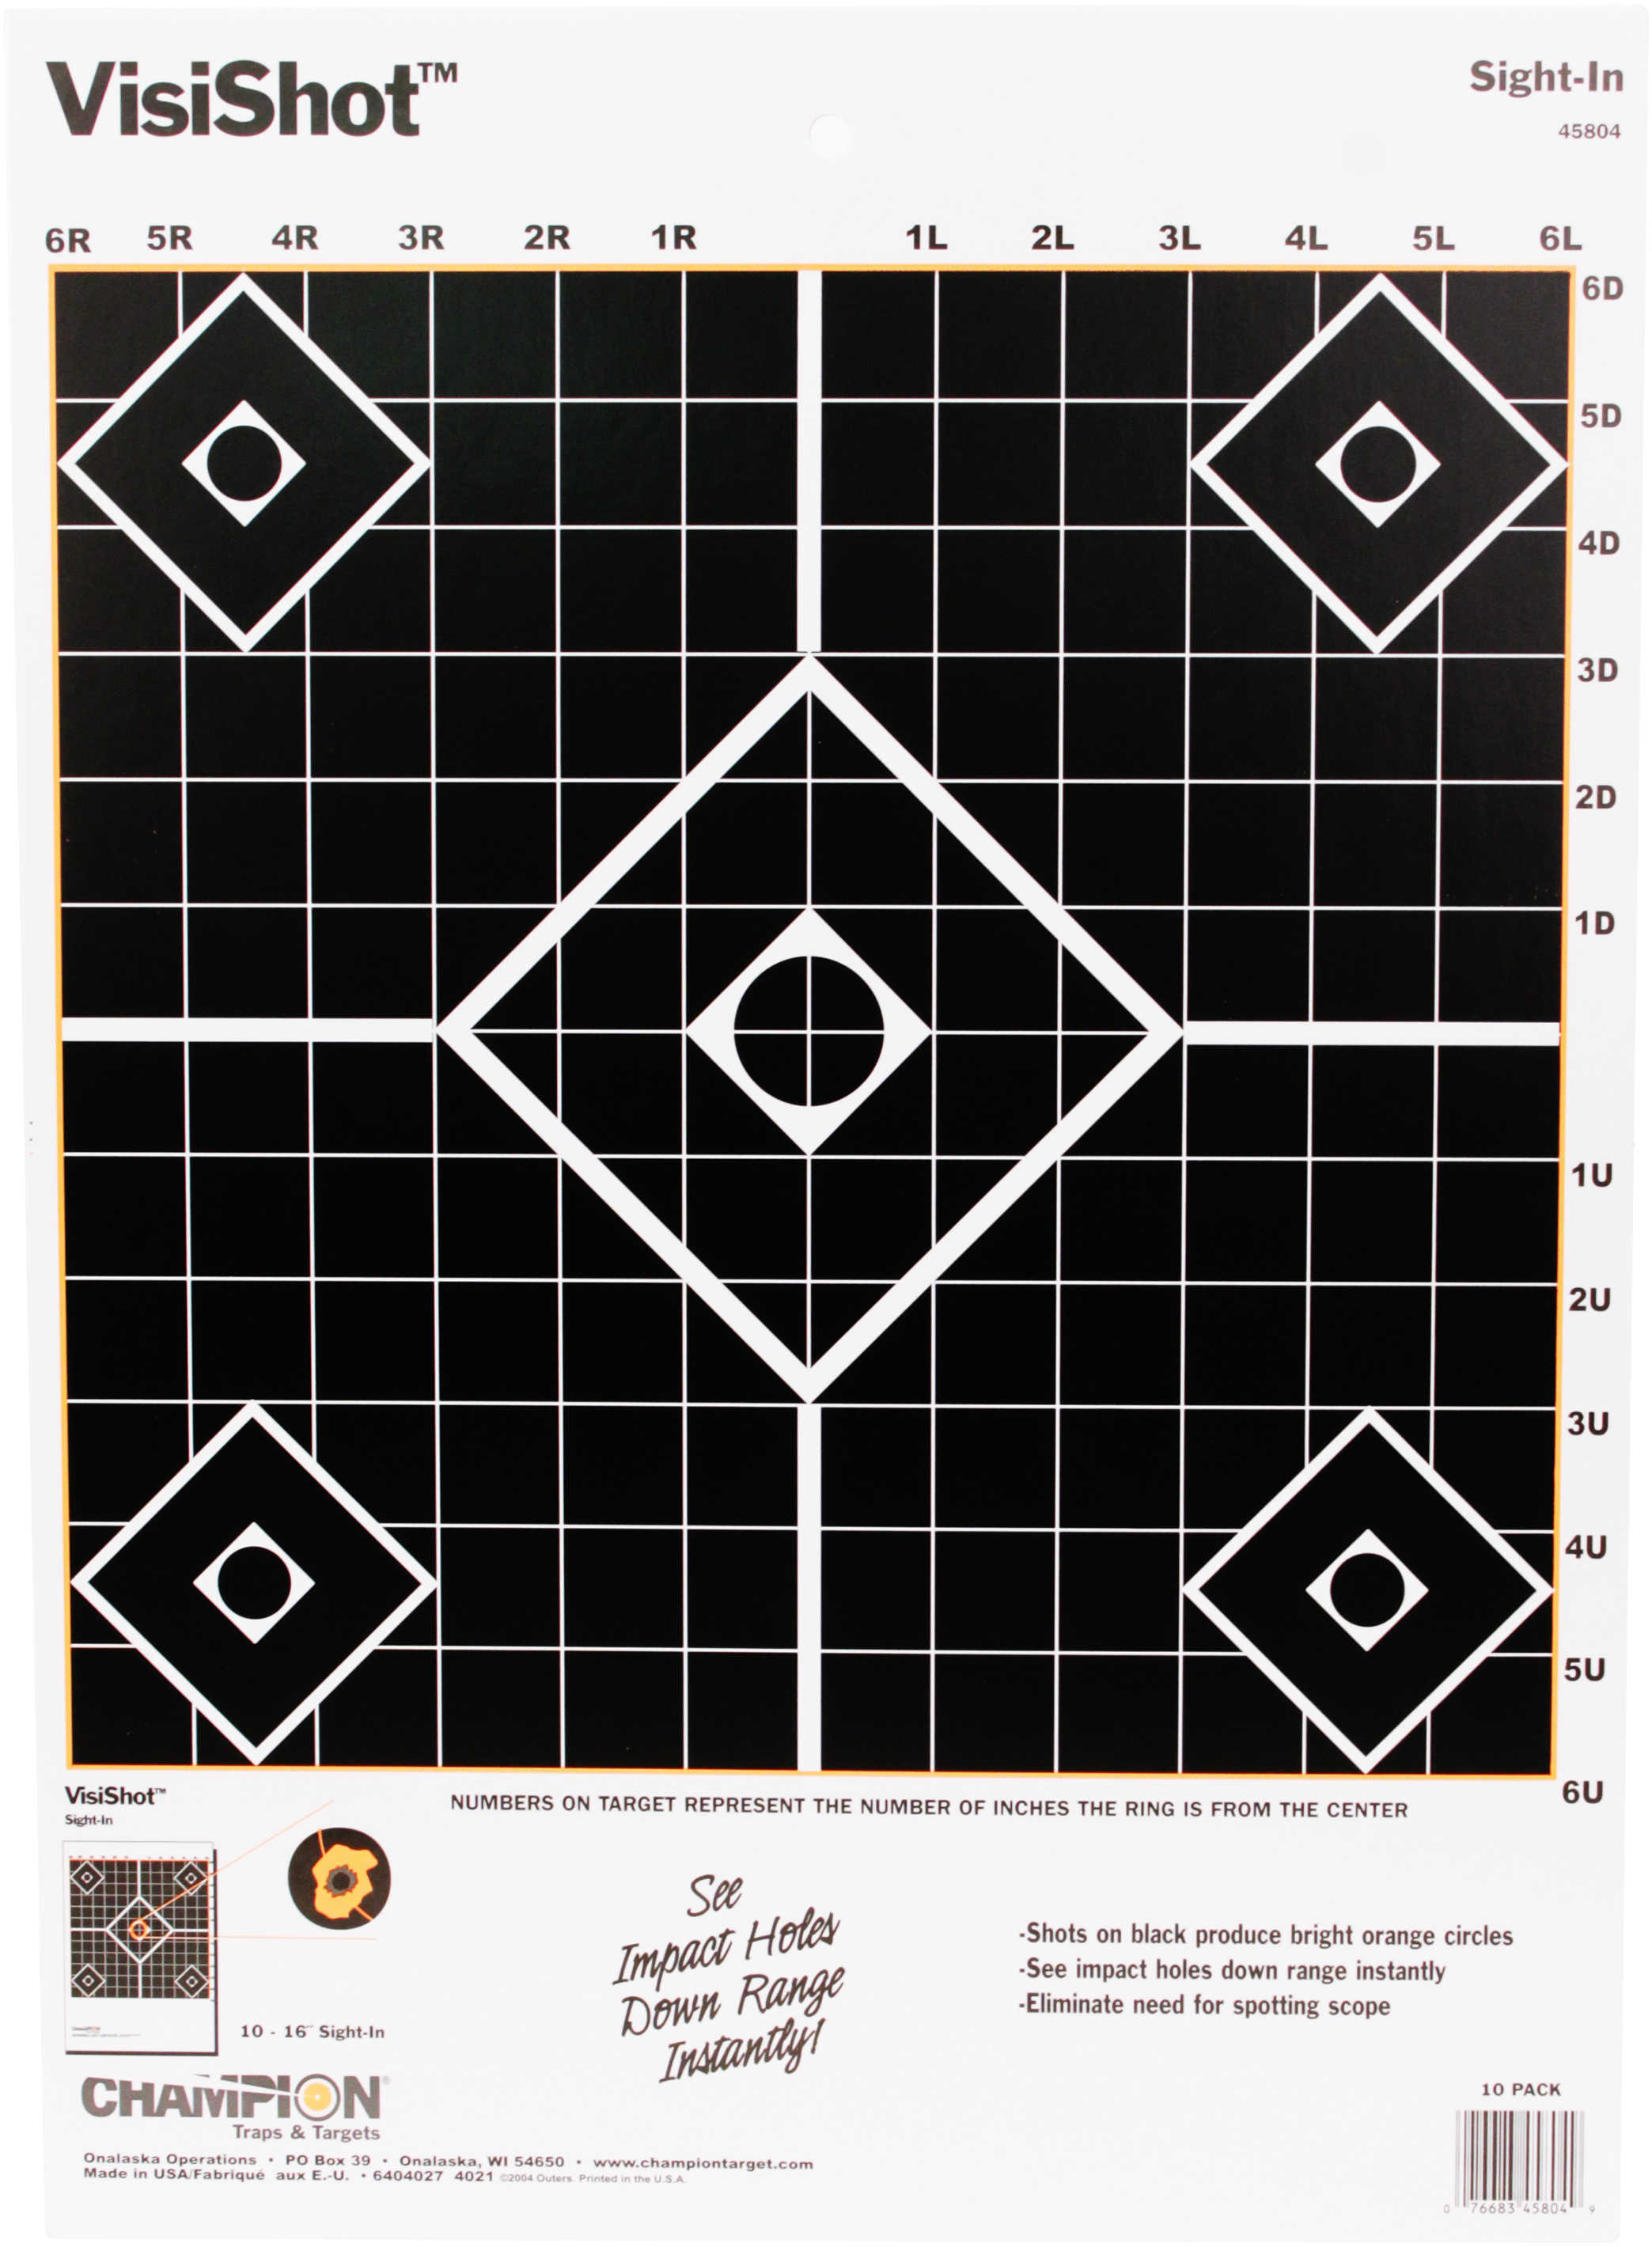 Champion Traps And Targets Visishot Sight In - 10 Pack 13X18" Bright Orange circles Appear From Shots On Black